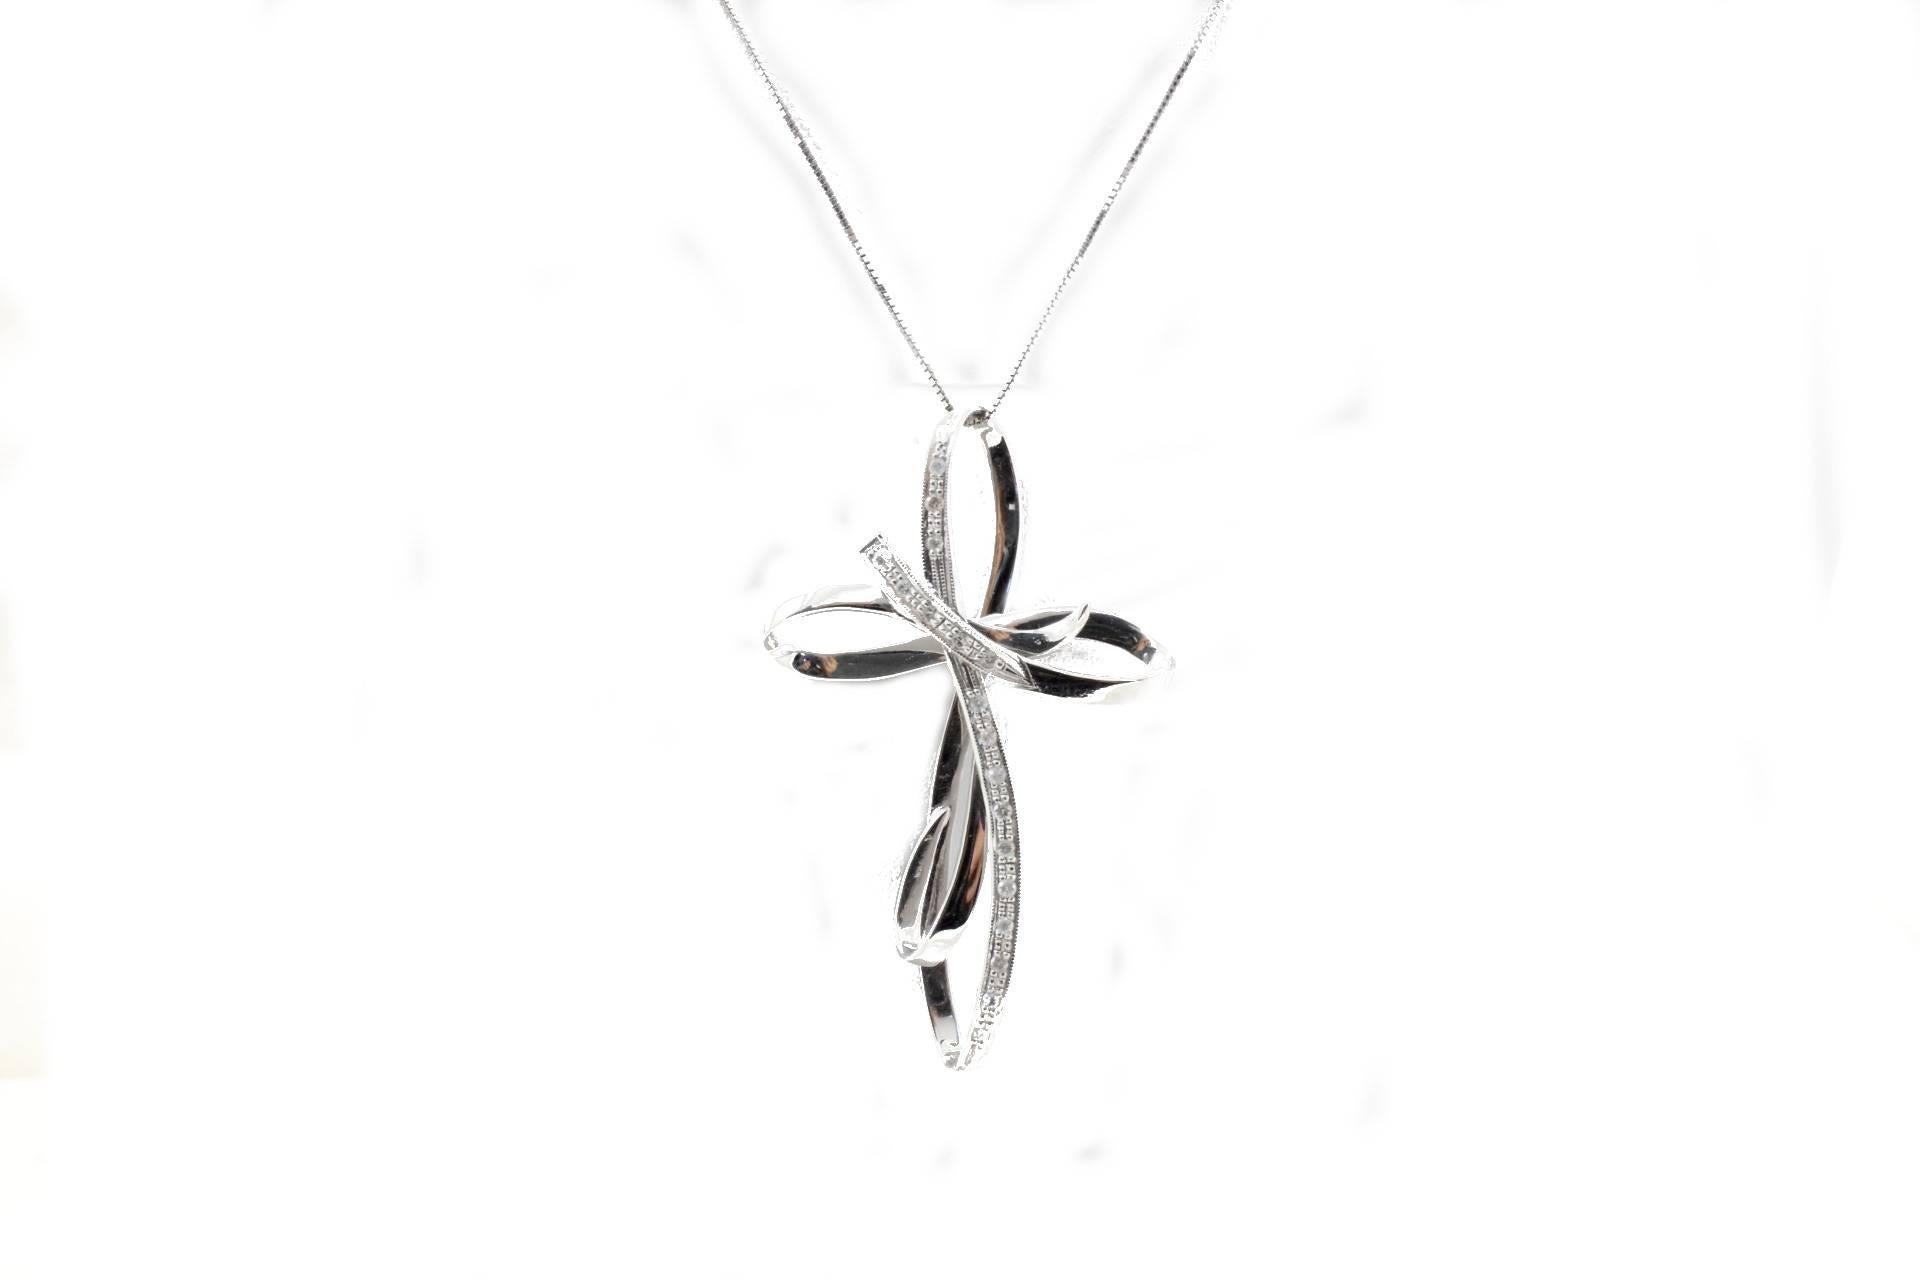 Cross pendant necklace in 18kt white gold mounted with diamonds.

Diamonds 0.23 kt
Tot.Weight 5.90 gr
R.F giea